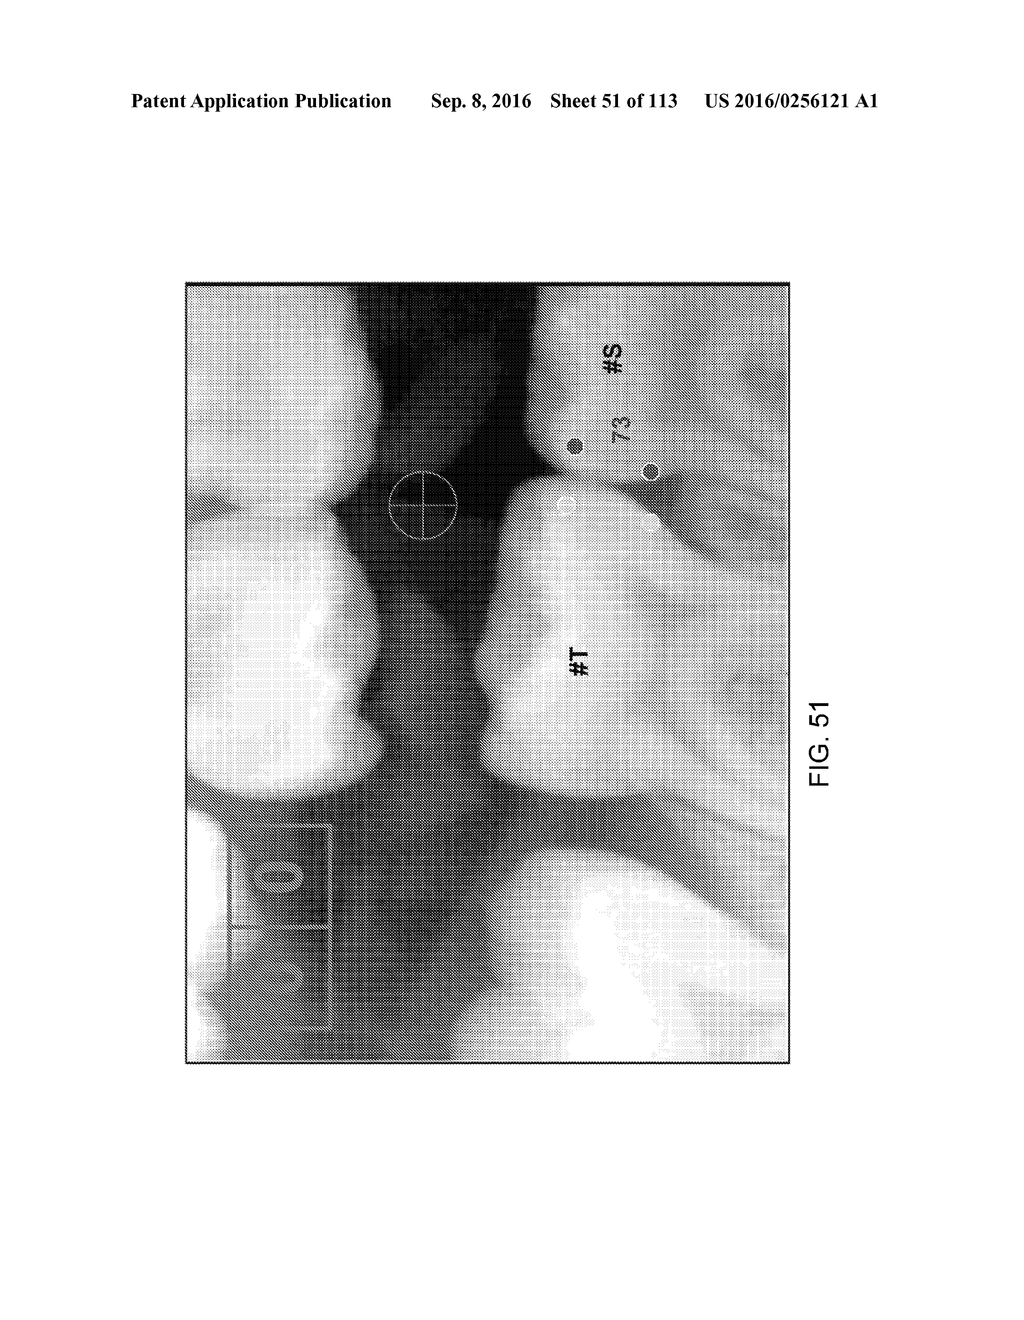 DIGITAL X-RAY DIAGNOSIS AND EVALUATION OF DENTAL DISEASE - diagram, schematic, and image 52